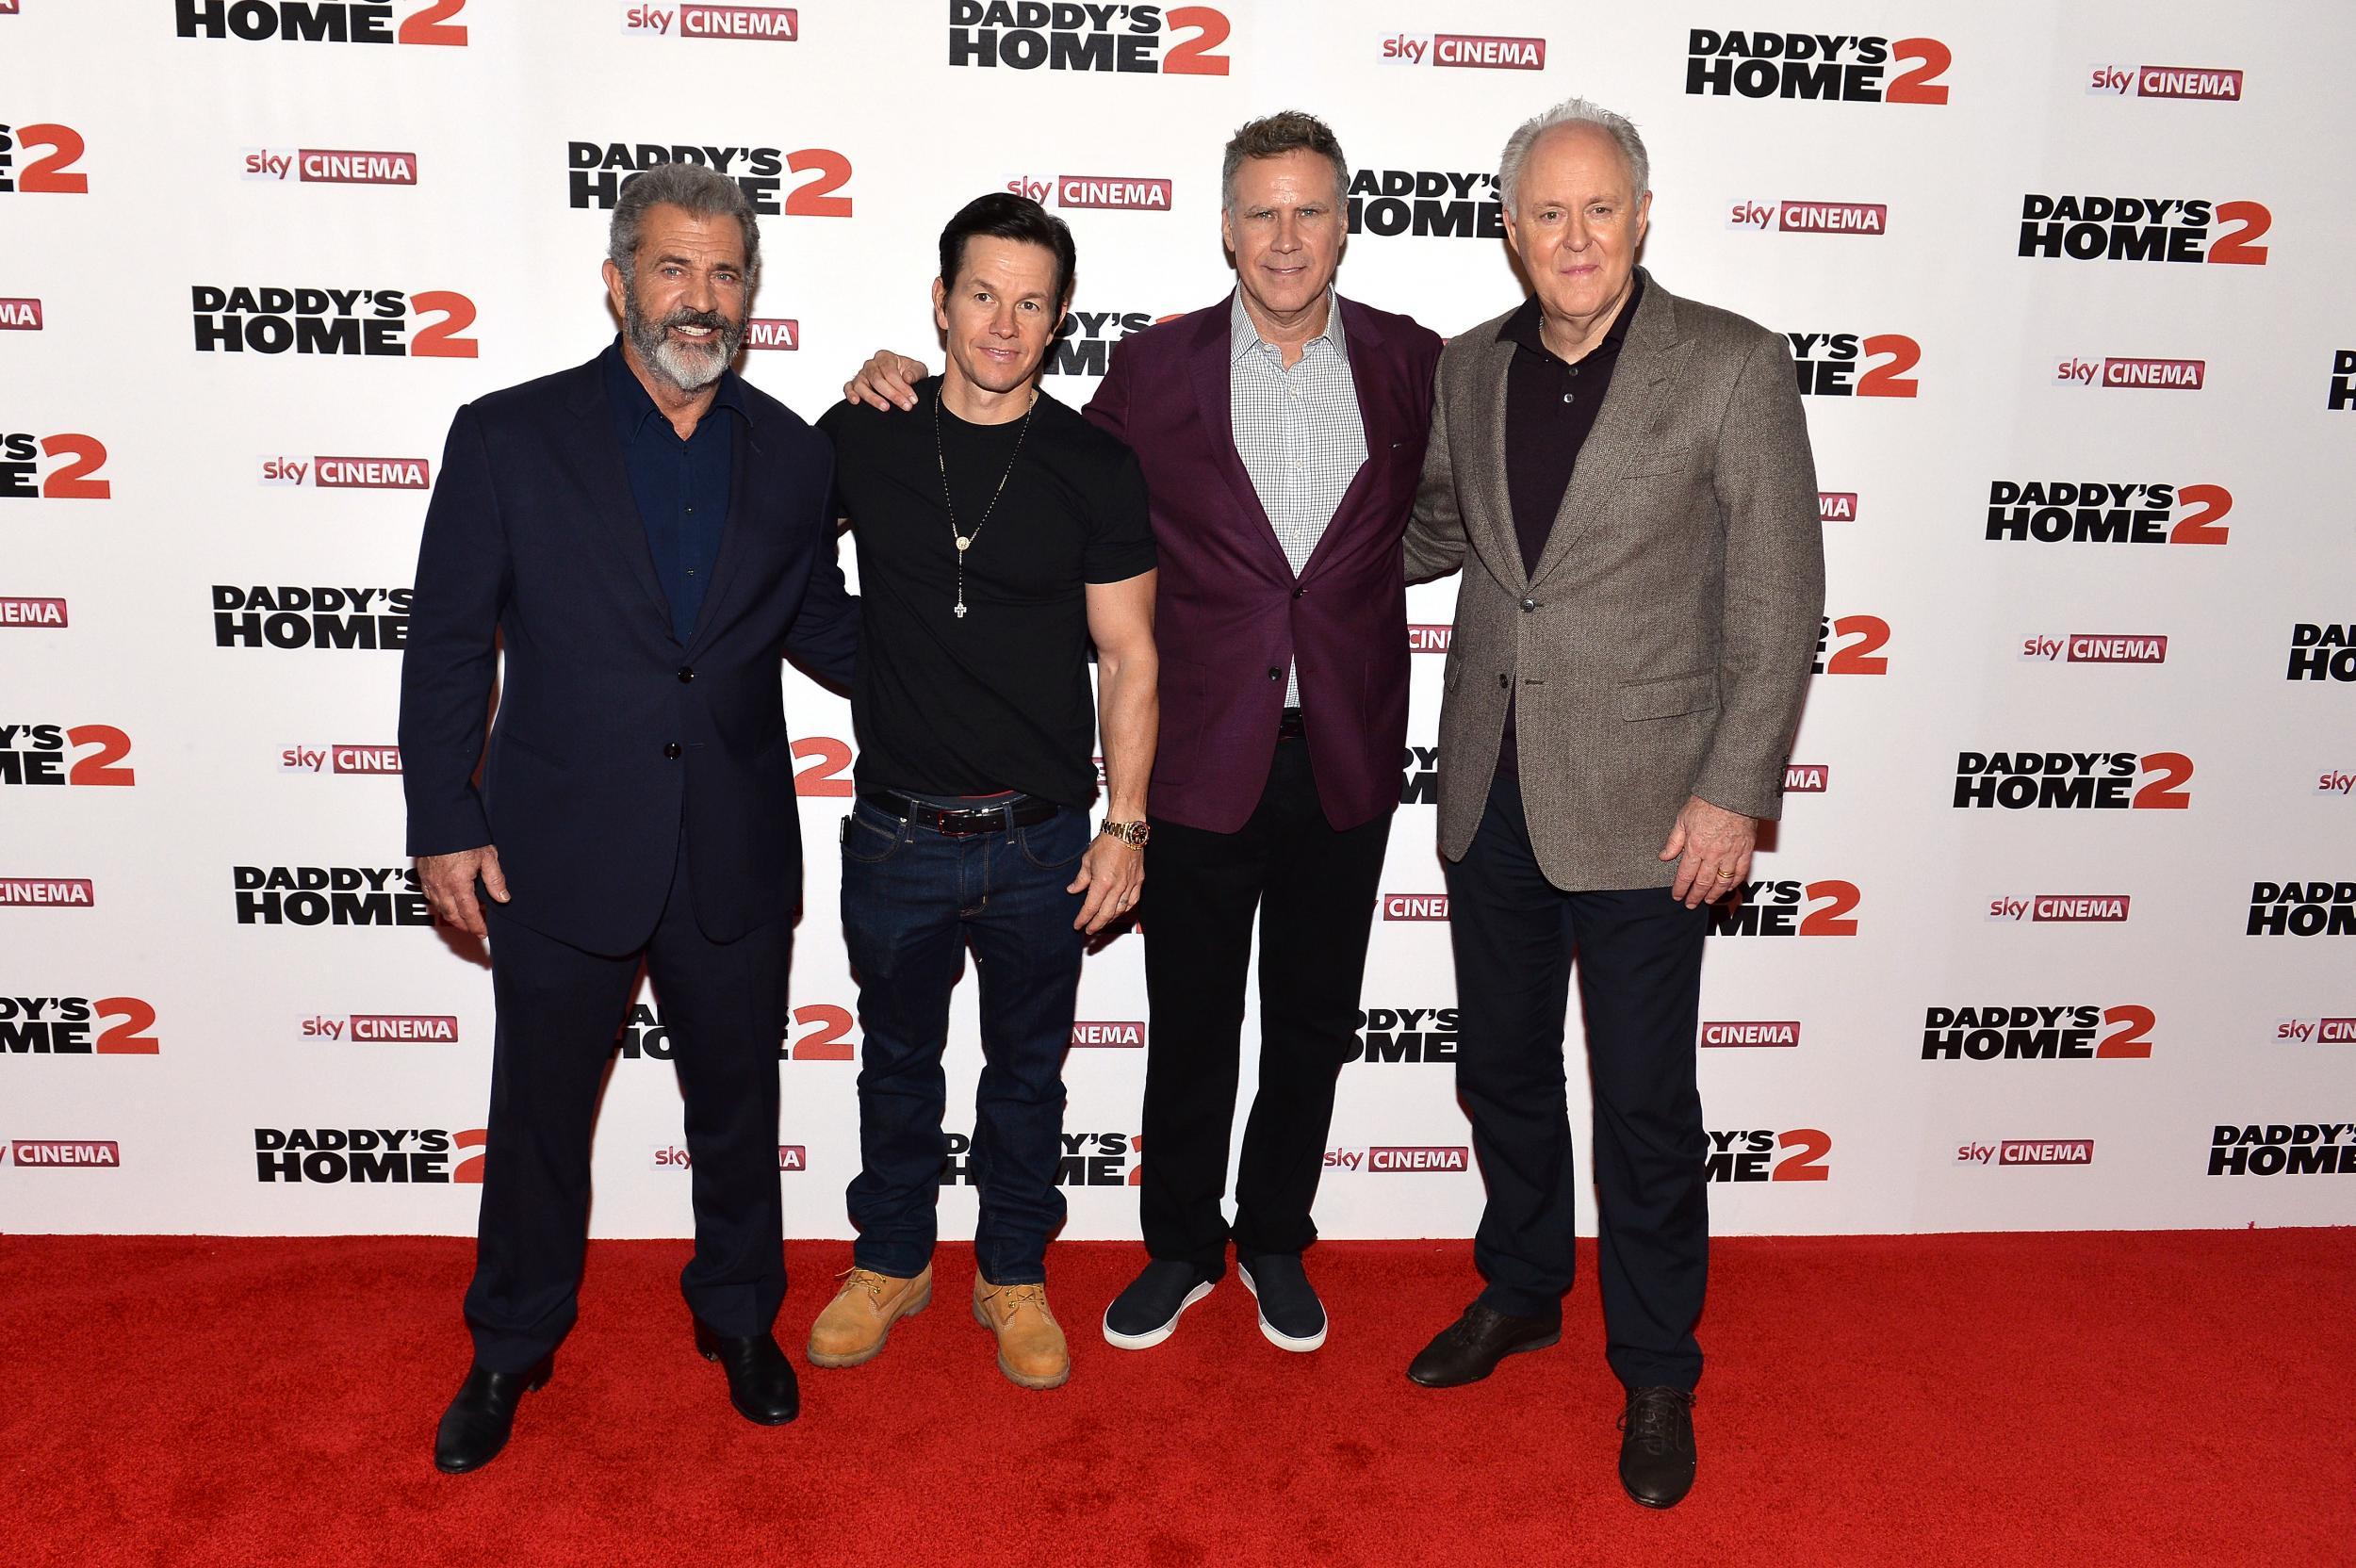 Mel Gibson, Mark Wahlberg, Will Ferrell and John Lithgow attend the UK Premiere of 'Daddy's Home 2' at Vue West End on November 16, 2017 in London, England. Credit: Jeff Spicer/Getty Images for Paramount Pictures.